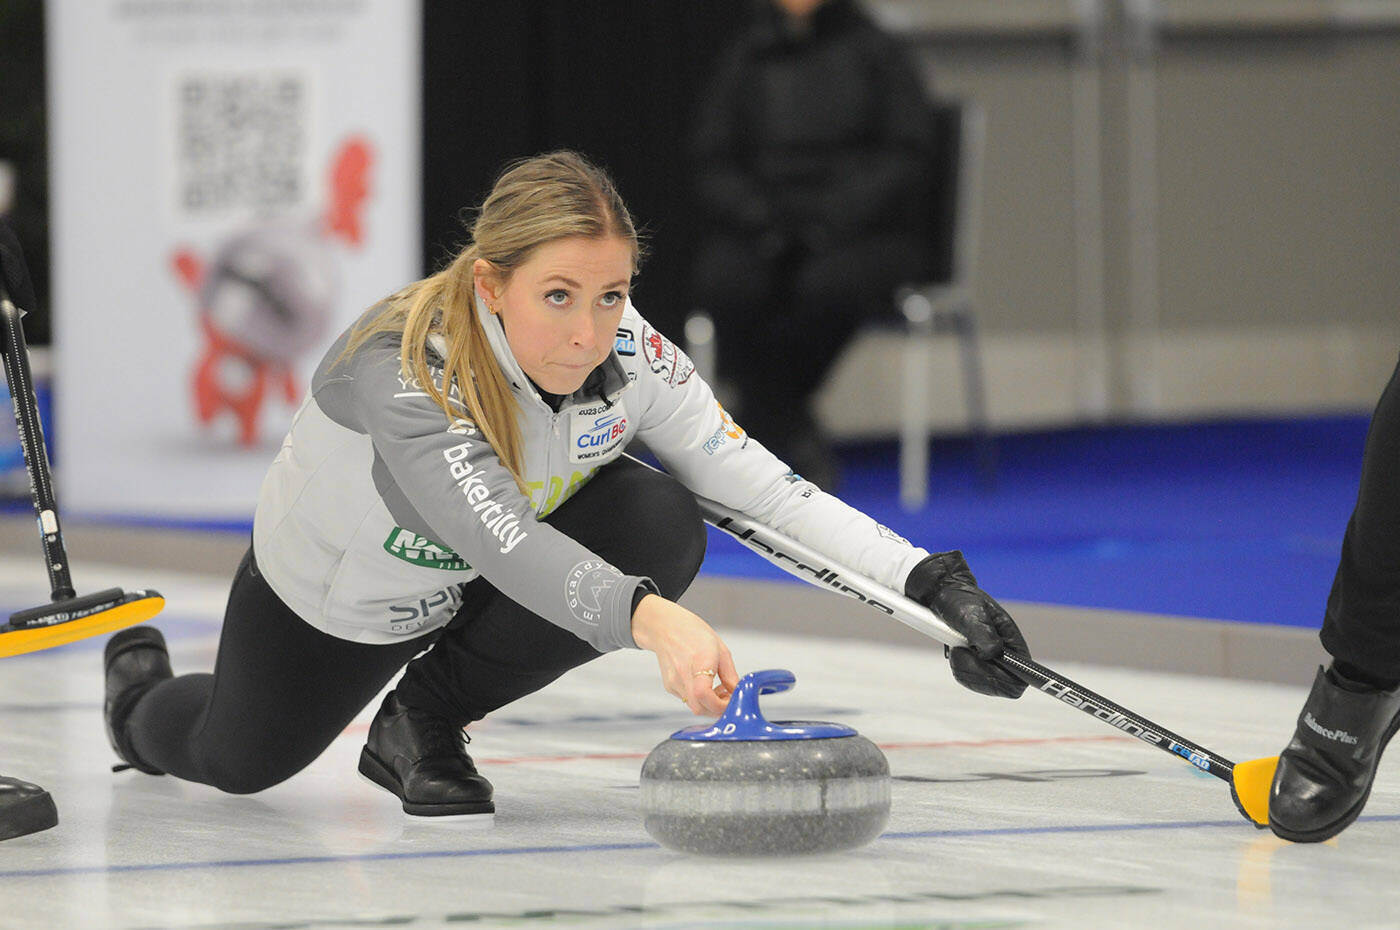 Sunday, Team Grandy won the right to represent BC at the 2023 Scotties Tournament of Hearts Curling Championships in Kamloops that runs Feb. 17-26. (Jenna Hauk/Chilliwack Progress)